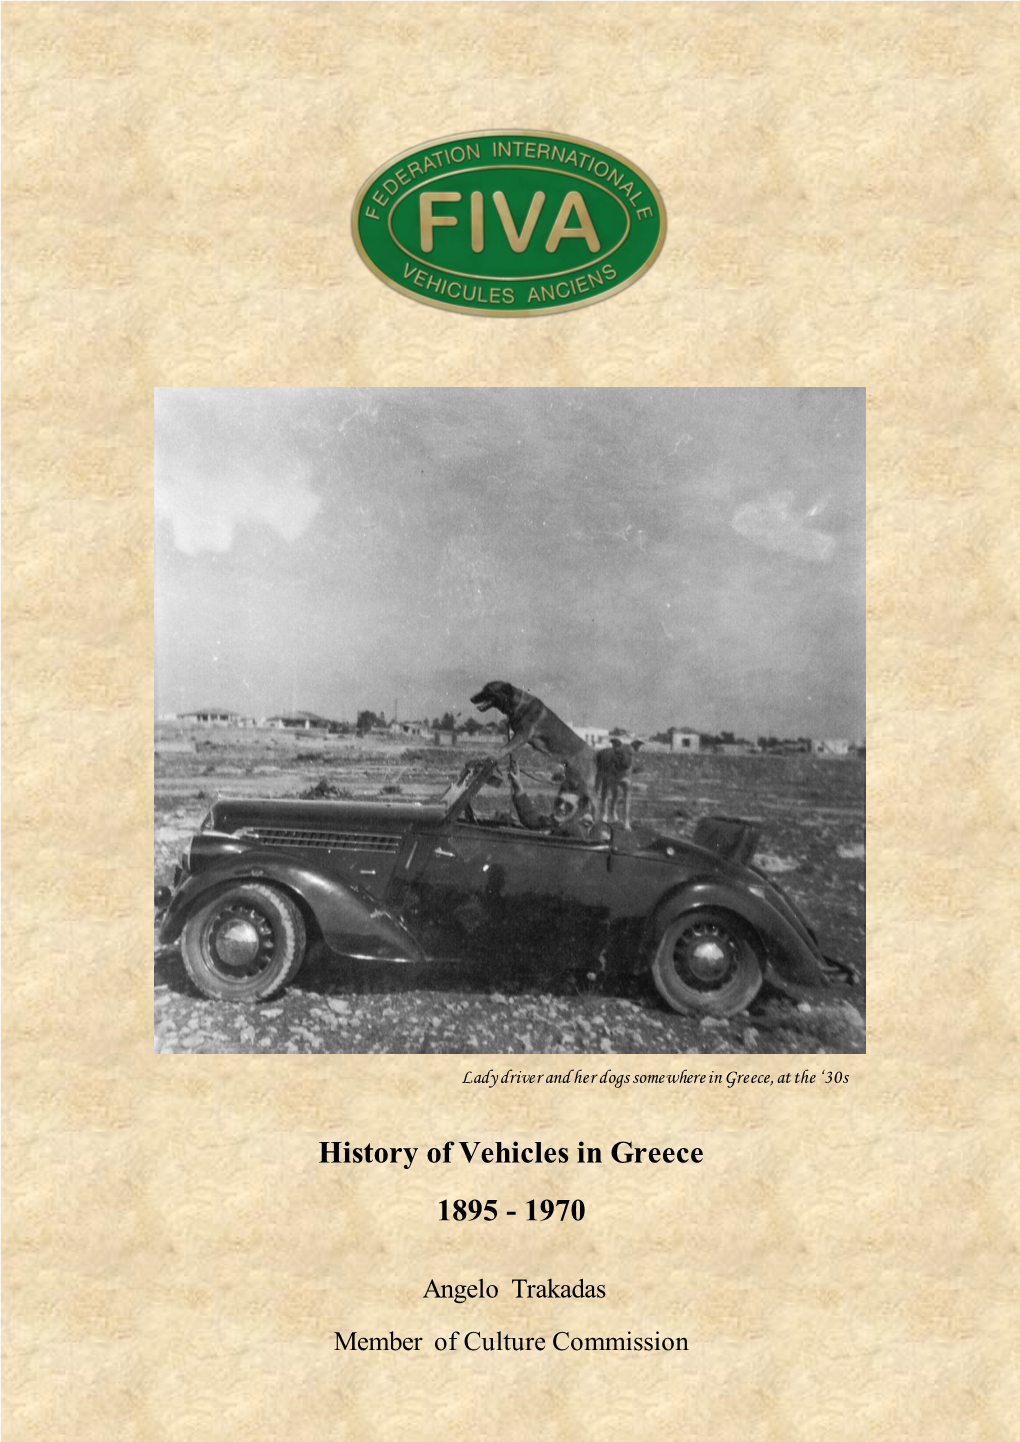 History of Vehicles in Greece 1895 - 1970